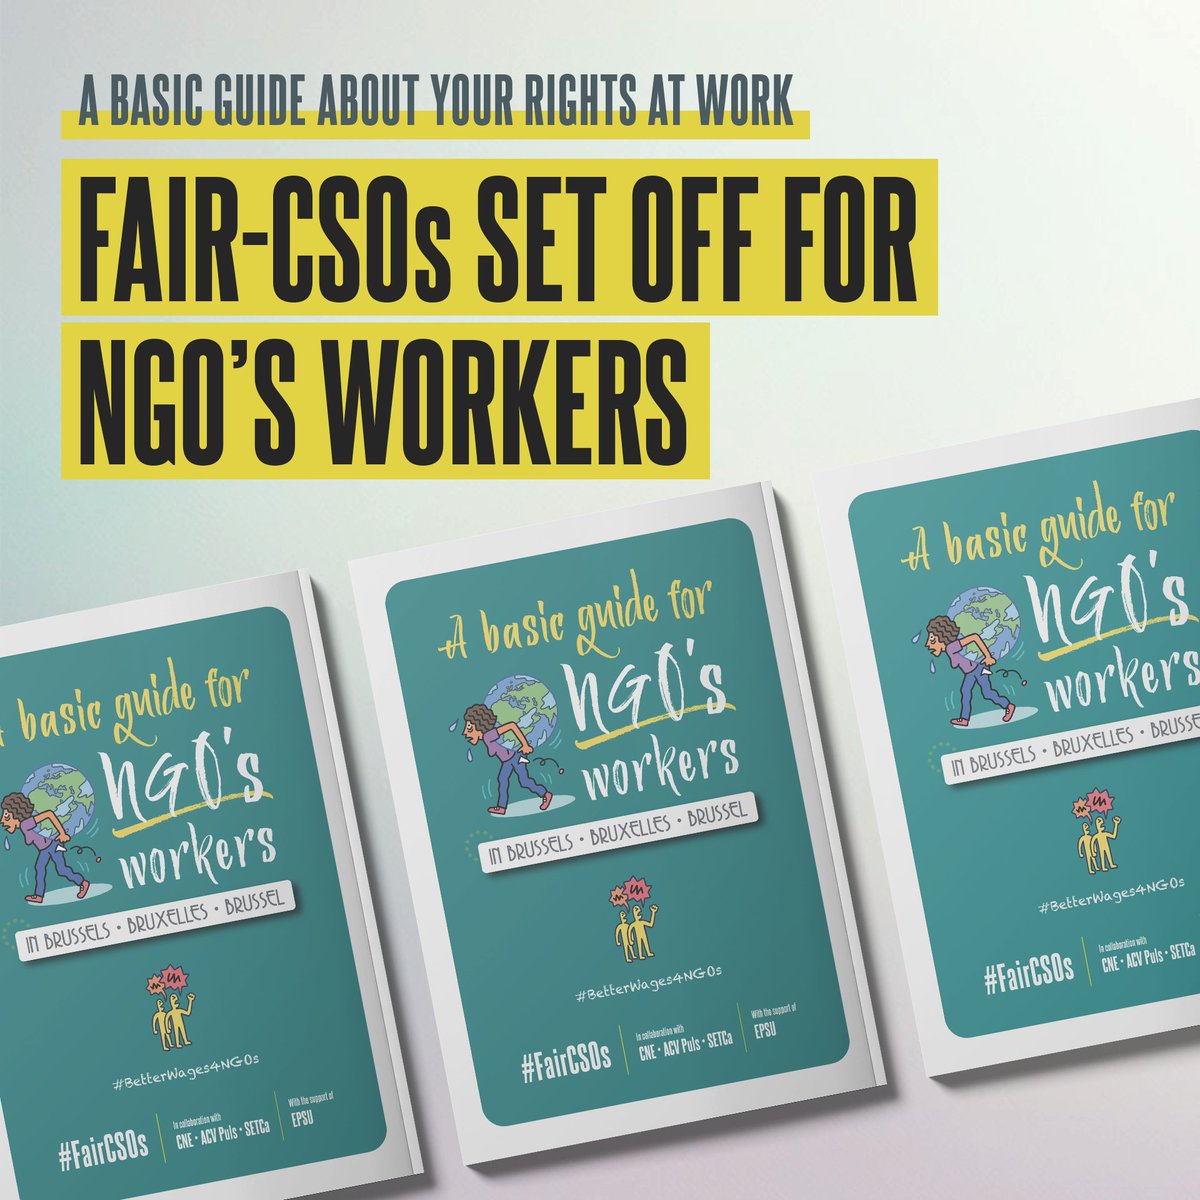 🔴Work for a European NGO? 🔴Wanna know your rights? #FairCSOs set off for NGO workers! Download the guide about NGO workers' rights at work👇🏾 epsu.org/article/work-e…